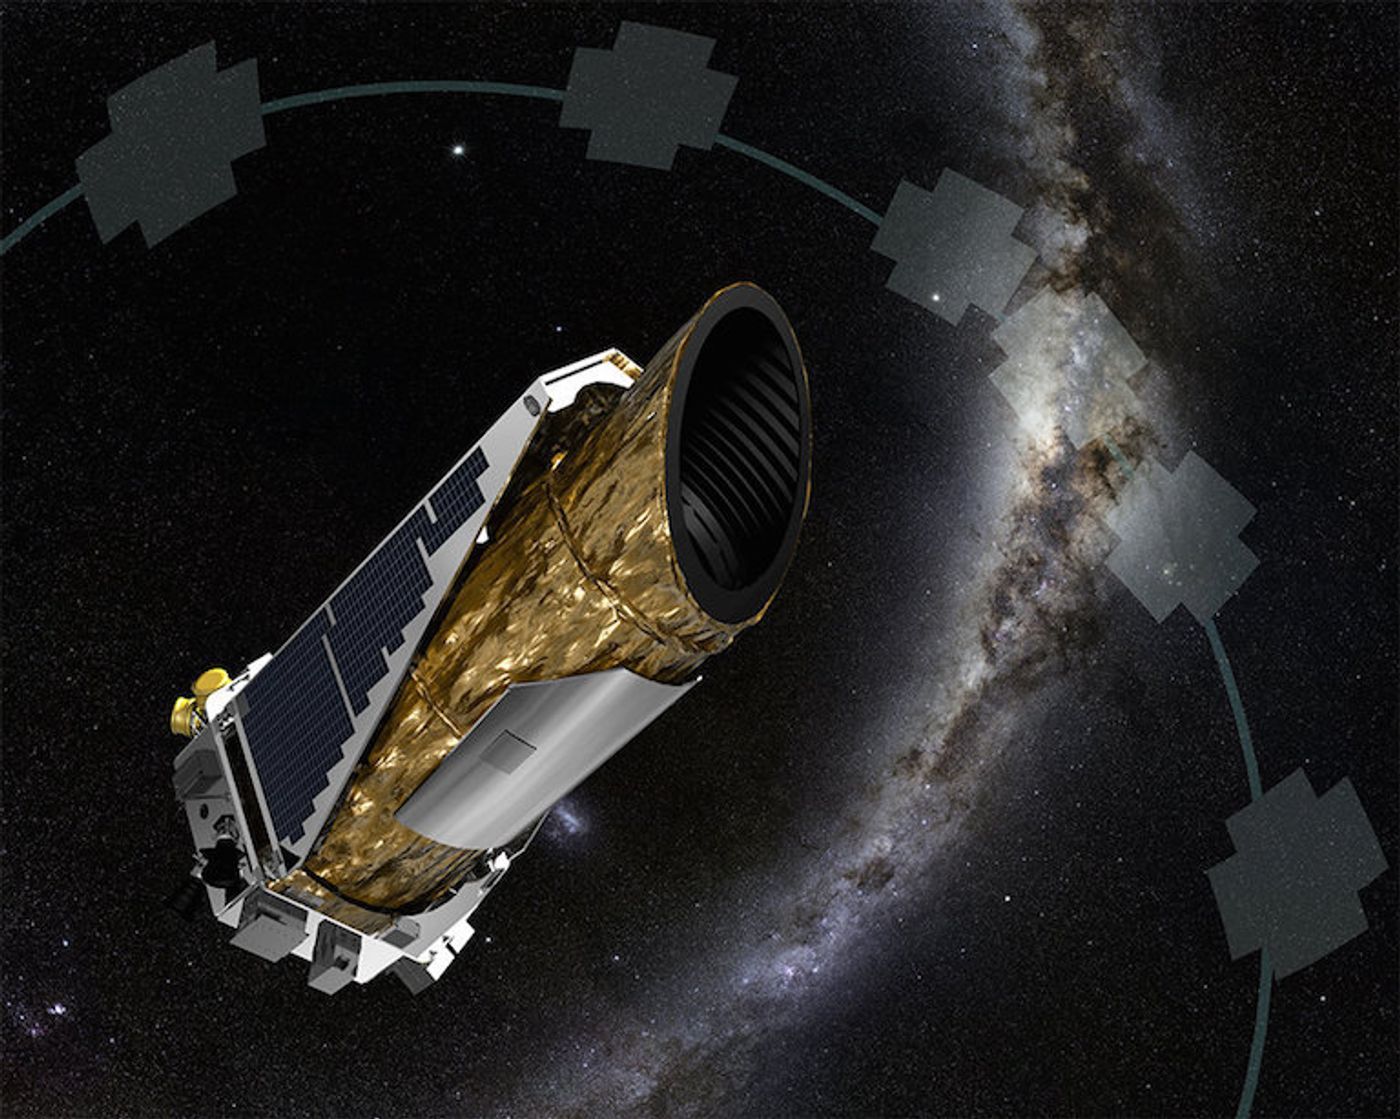 R.I.P. Kepler Space Telescope, you will be missed buddy.